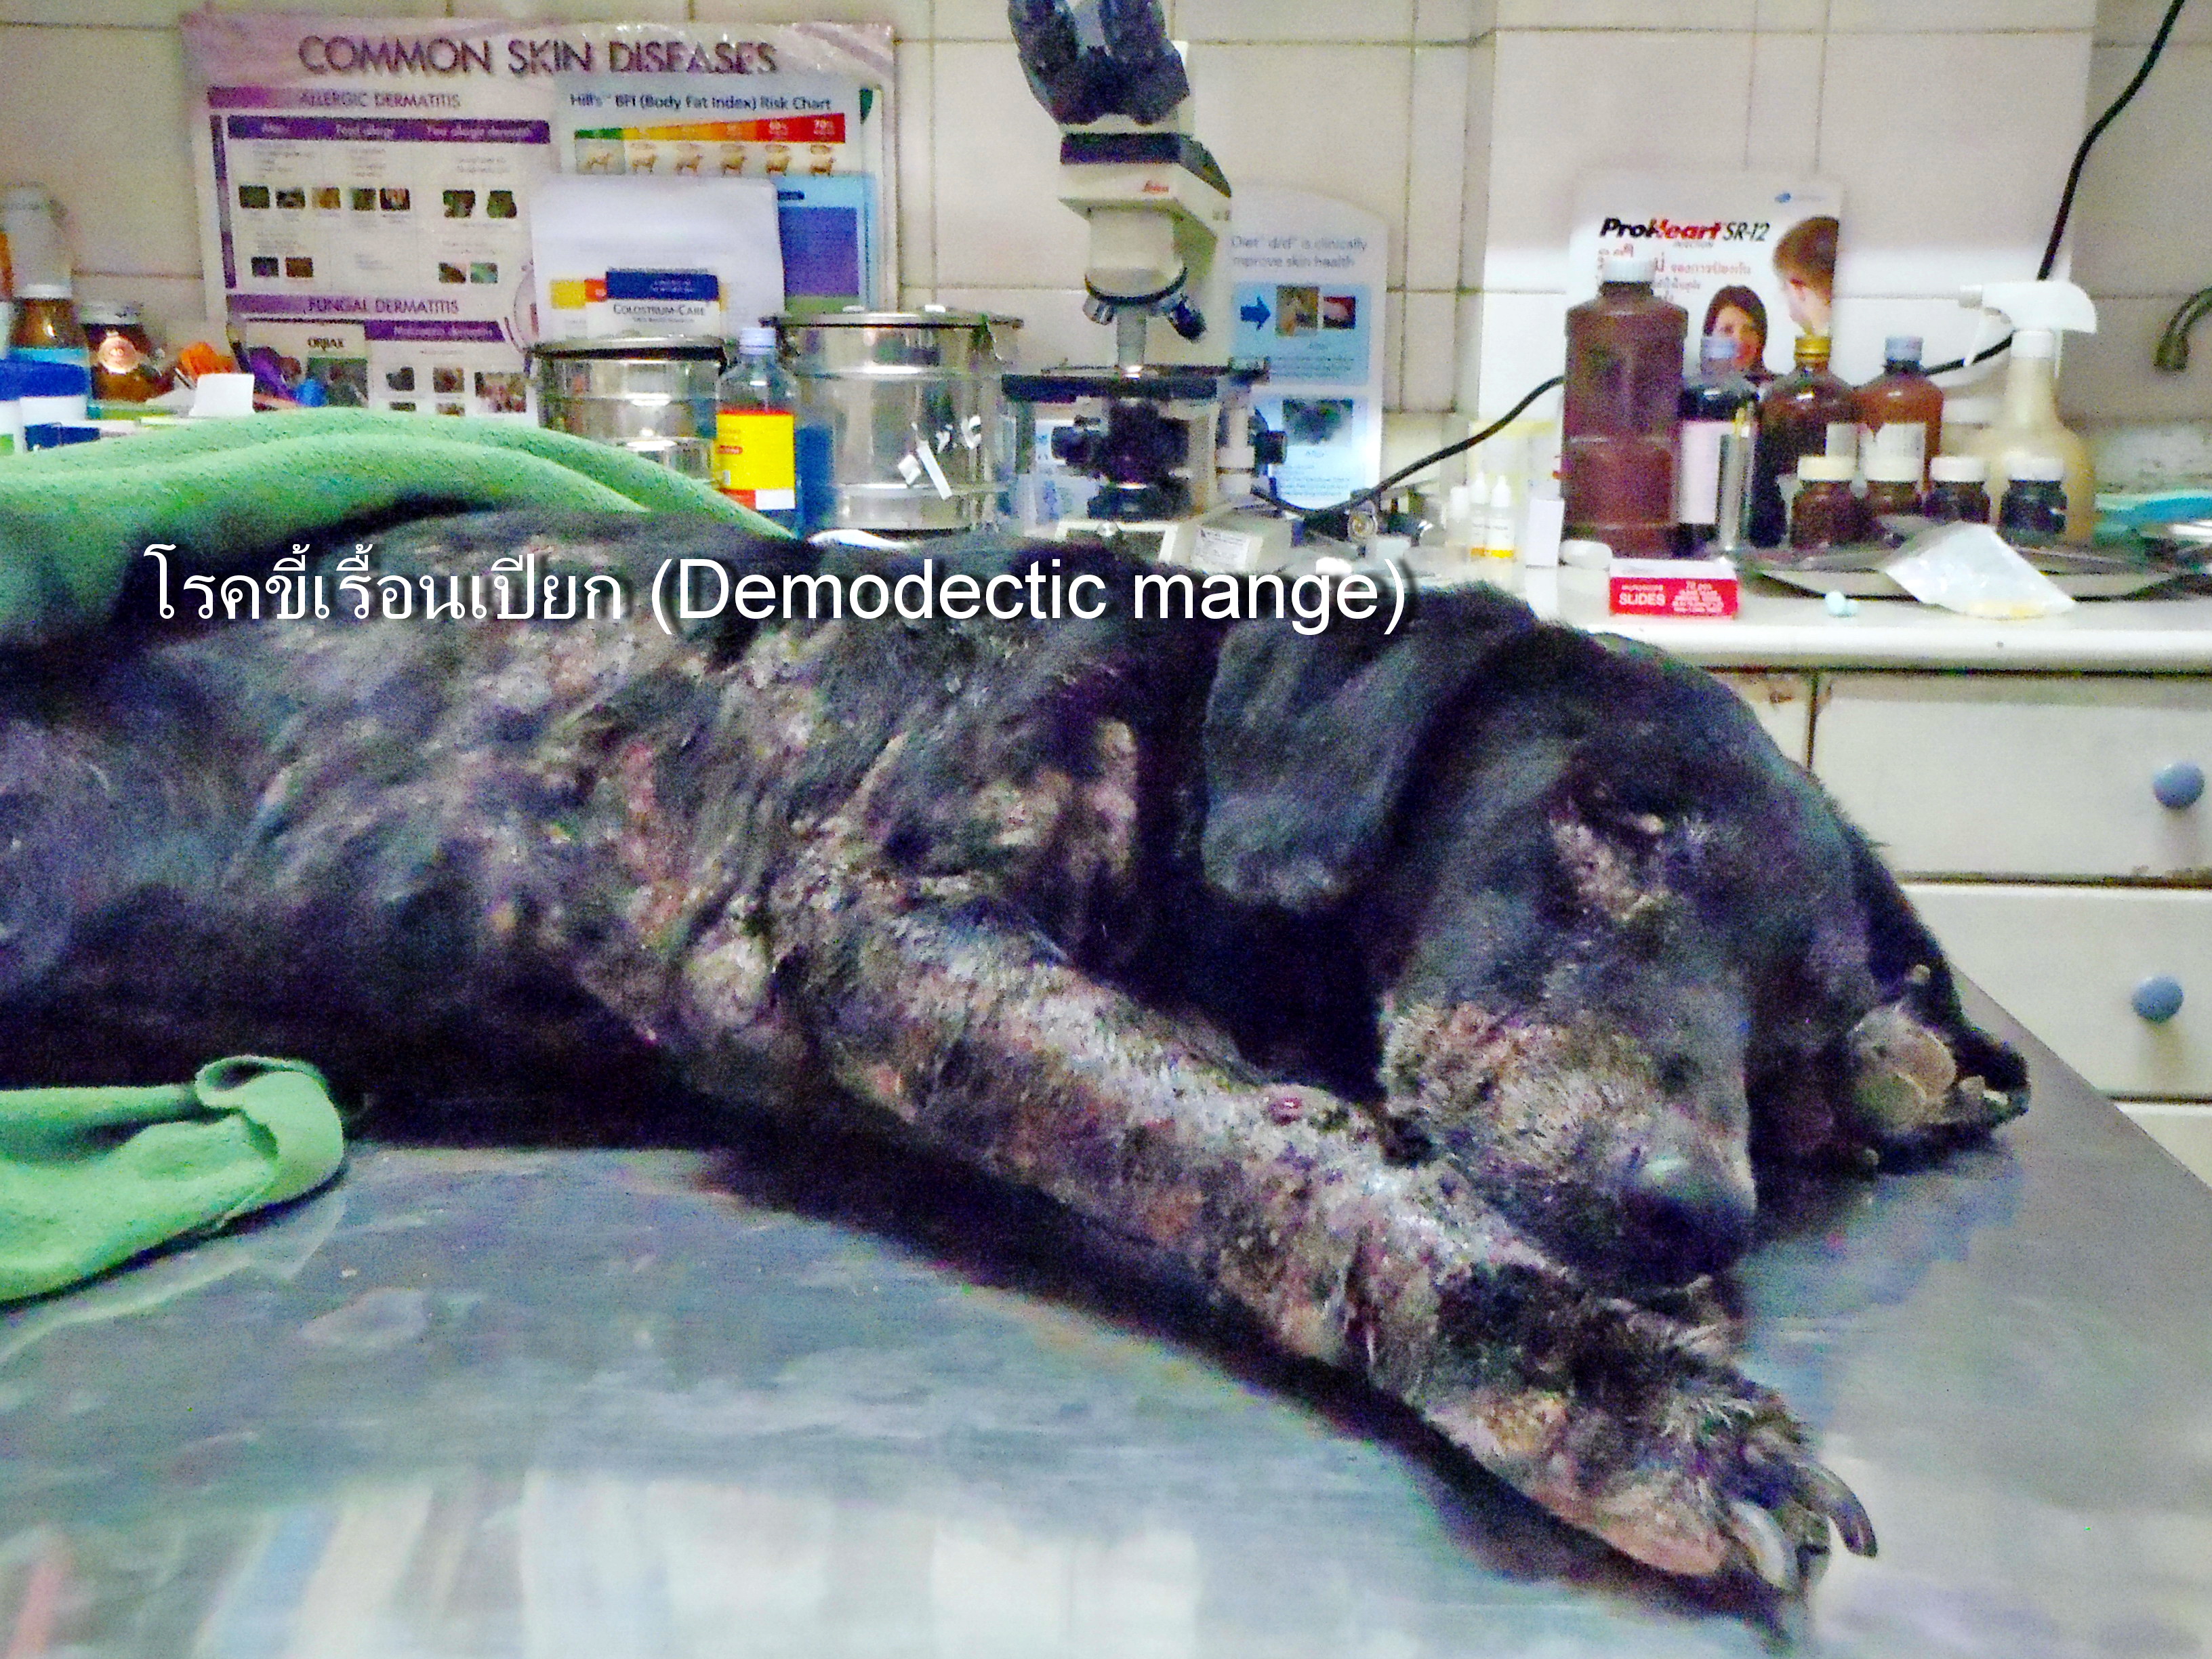 Dog suffers from Demodecosis